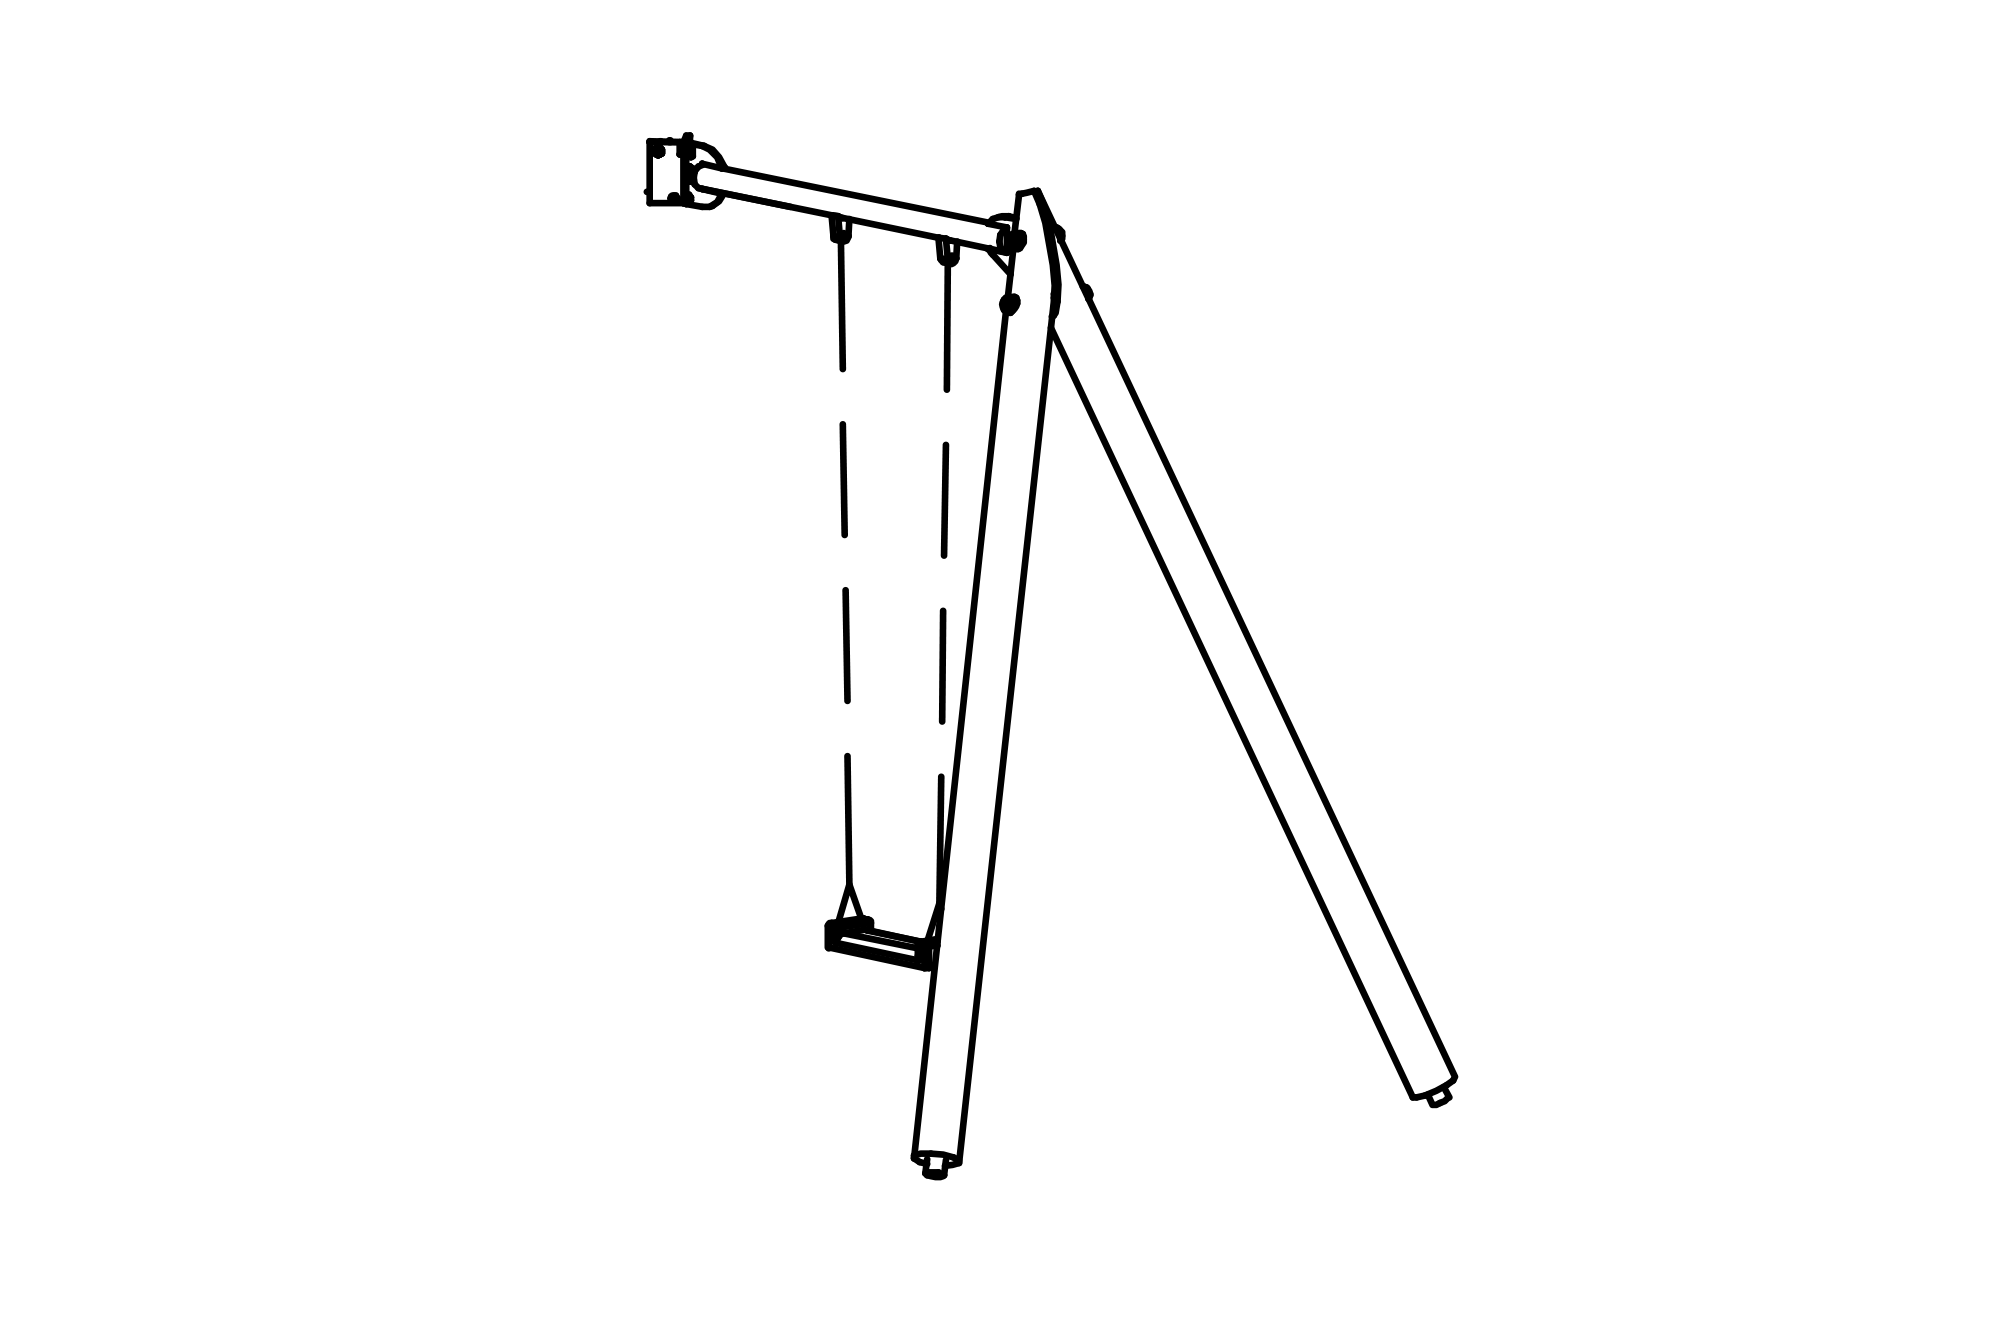 Single Swing special, height = 3 m with attachment to corner on Square Tower with roof